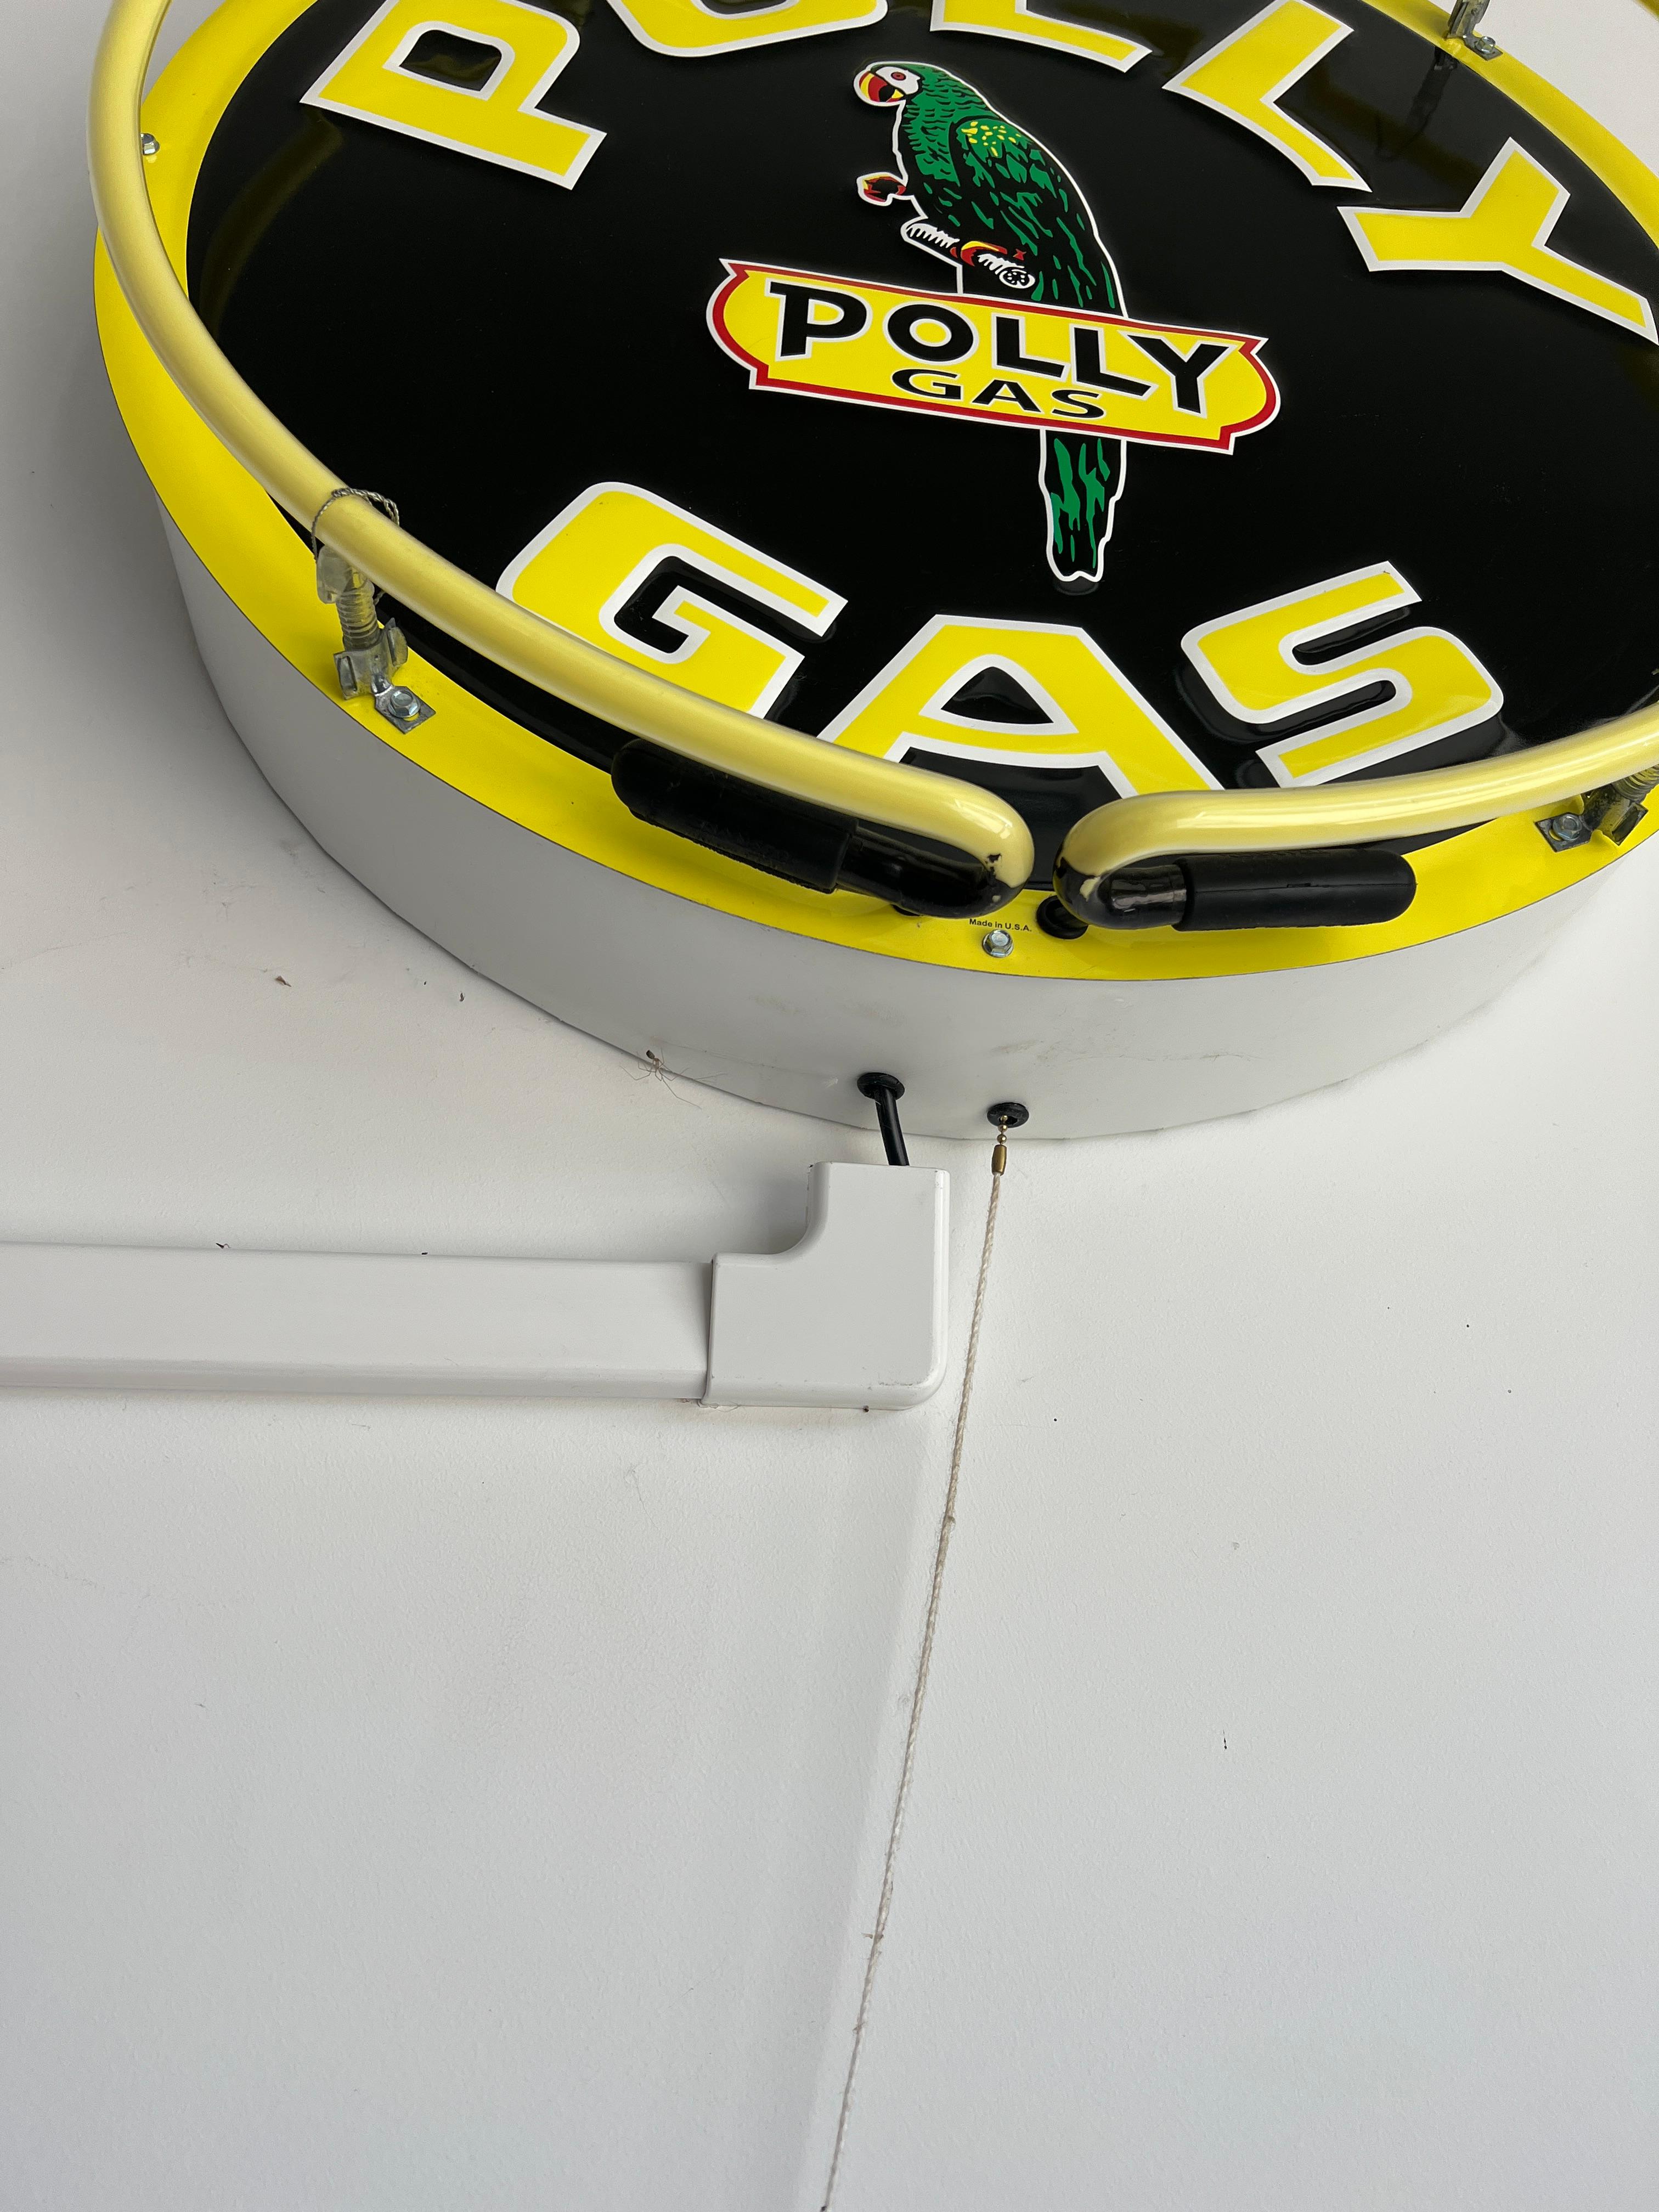 Polly Gas Neon Lighted sign Made in USA